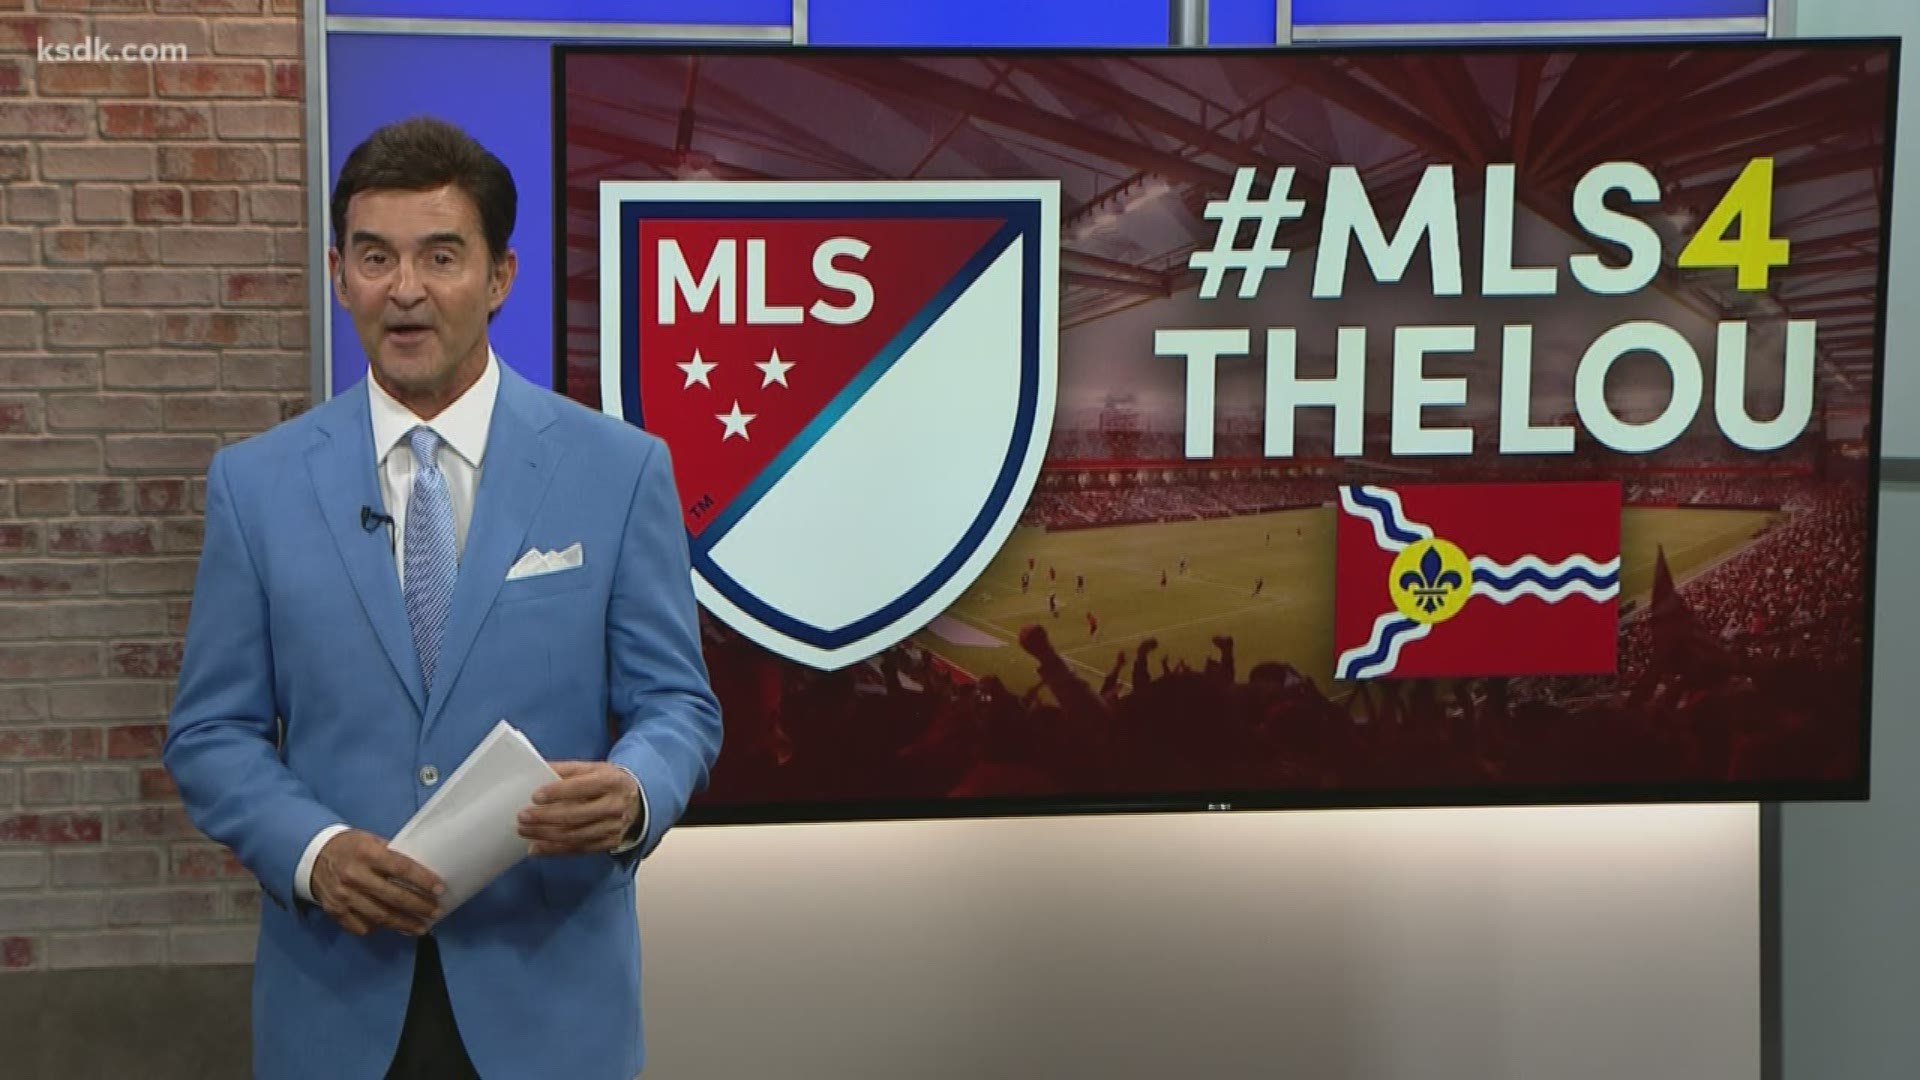 Ben Frederickson from the Post-Dispatch reported there is an imminent announcement about the MLS coming to St. Louis.